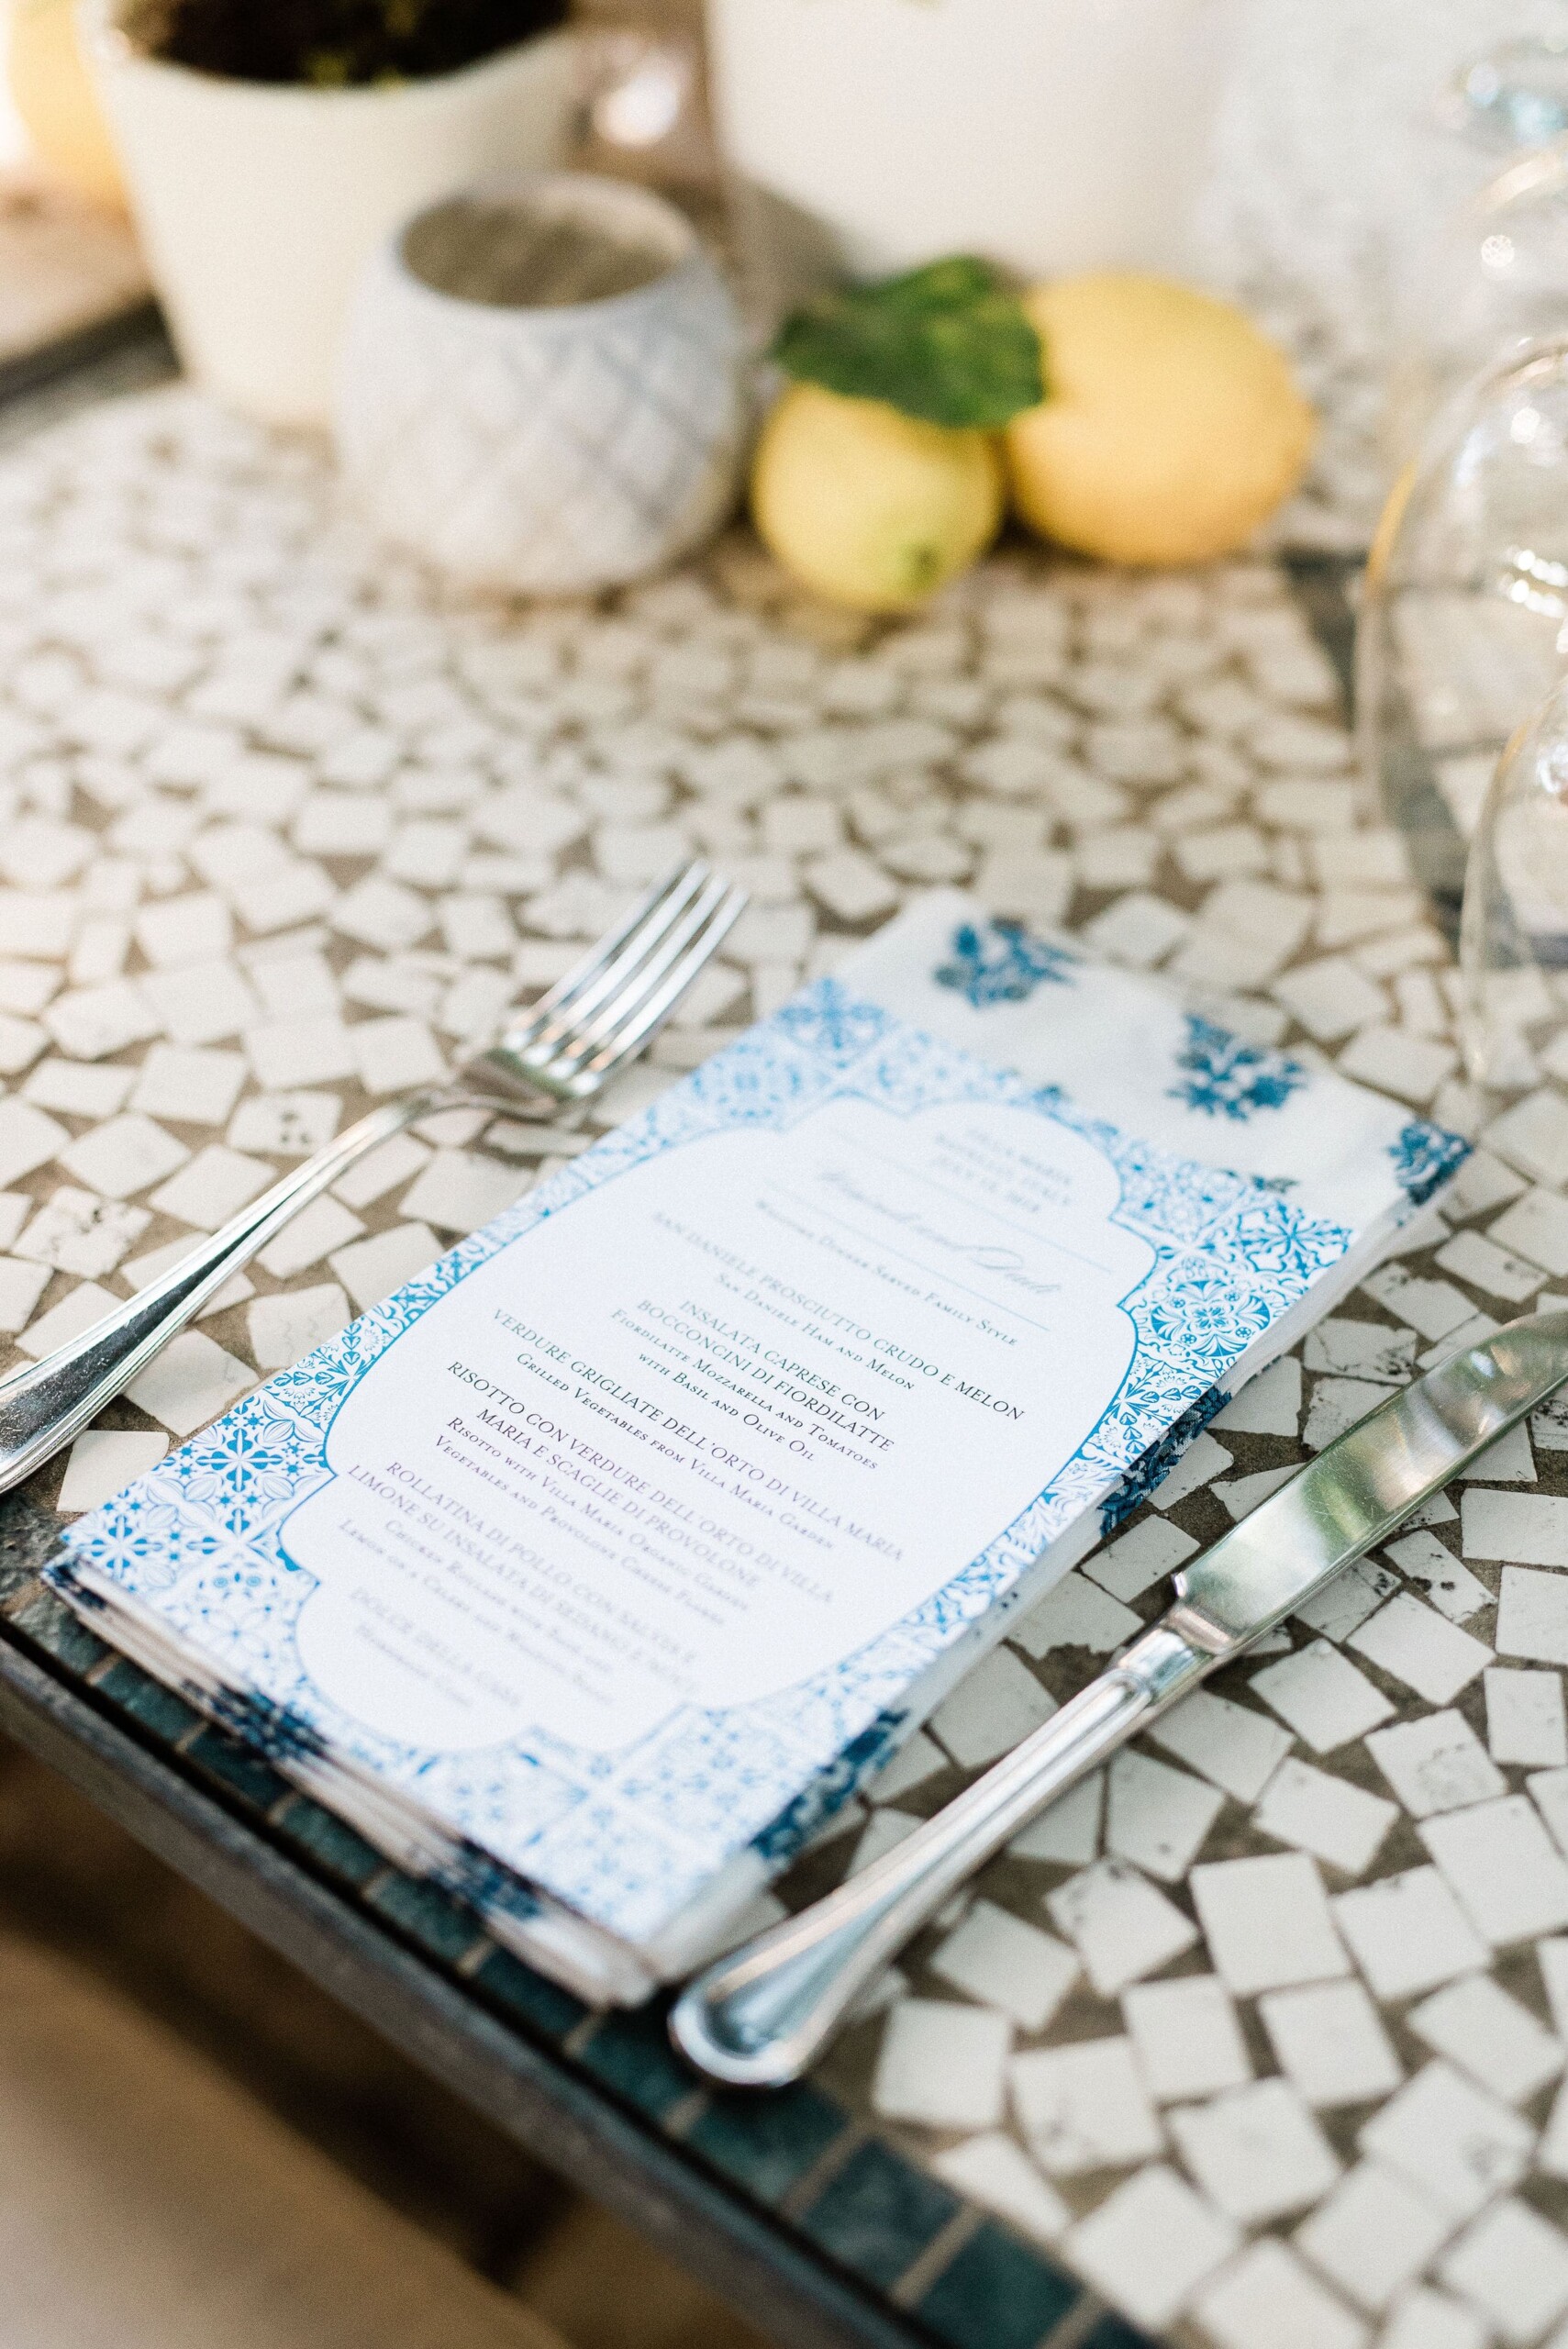 Printed menu and lemons decor for a welcome wedding dinner in Ravello